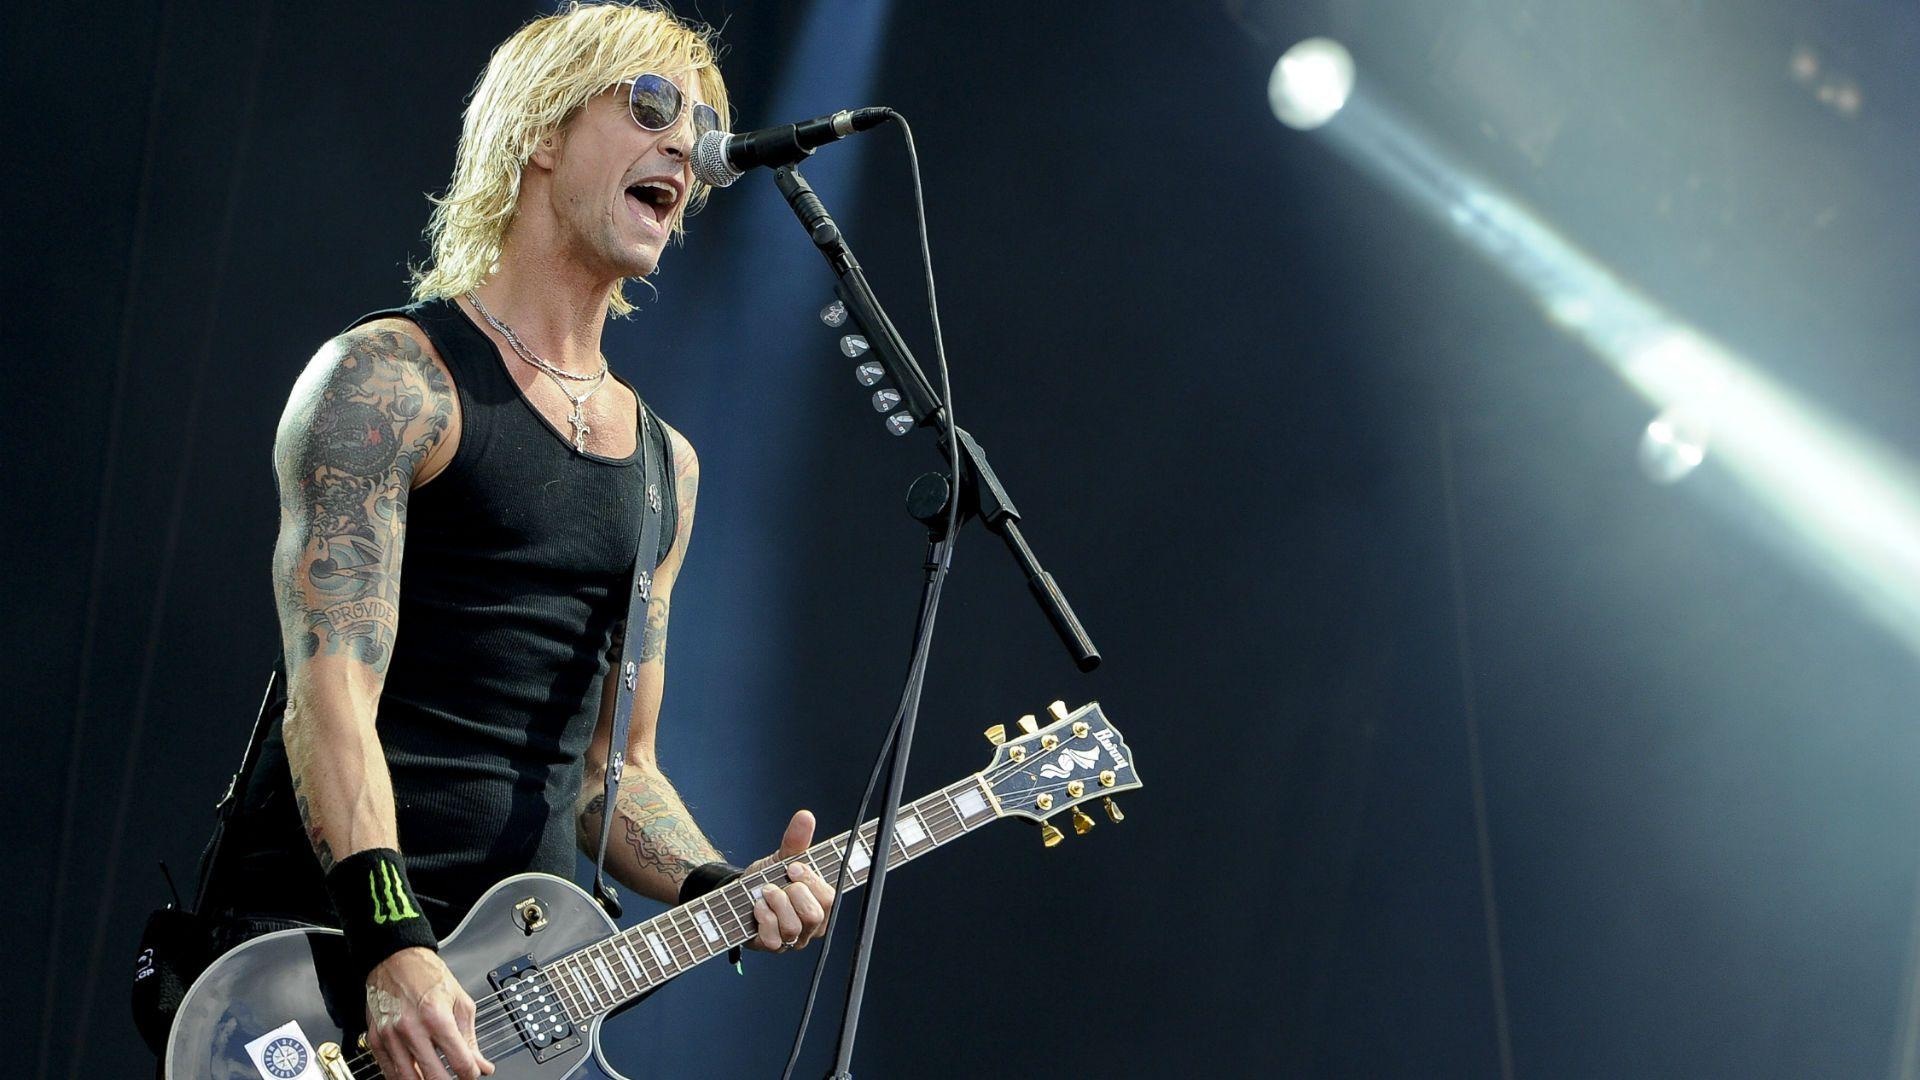 Update: Duff McKagan Joins G'N'R For 5 Shows. Yell! Magazine